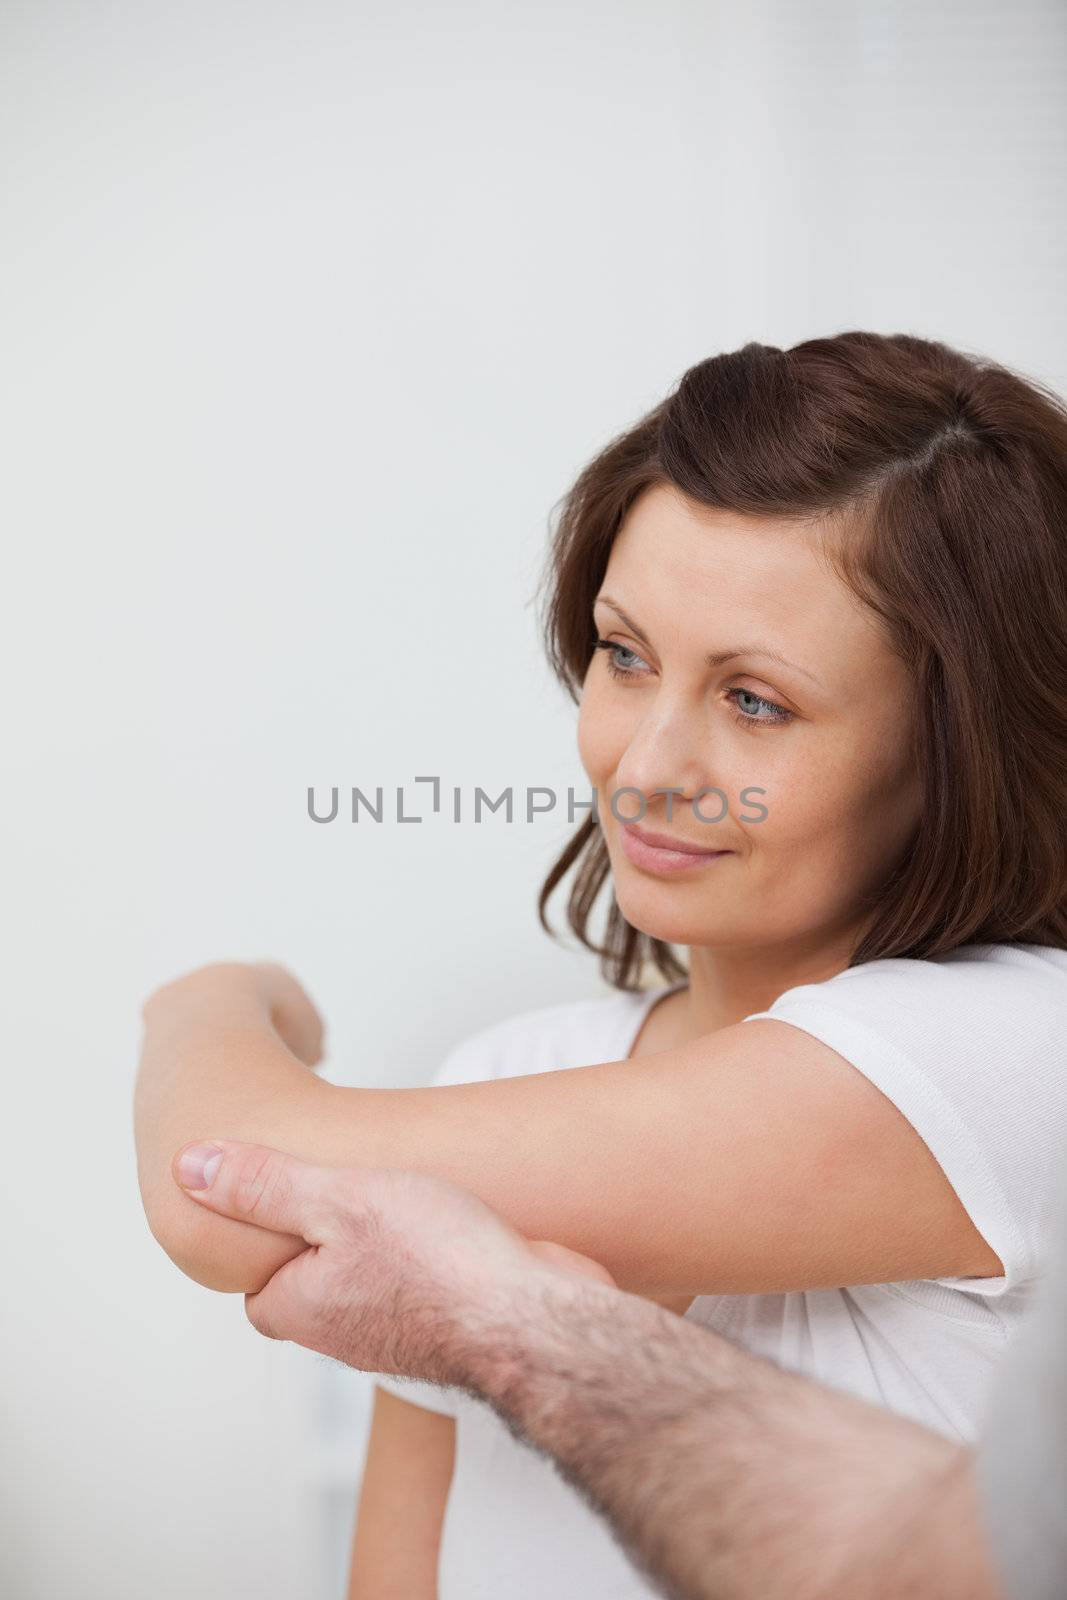 Smiling woman being stretched by a man in against grey background